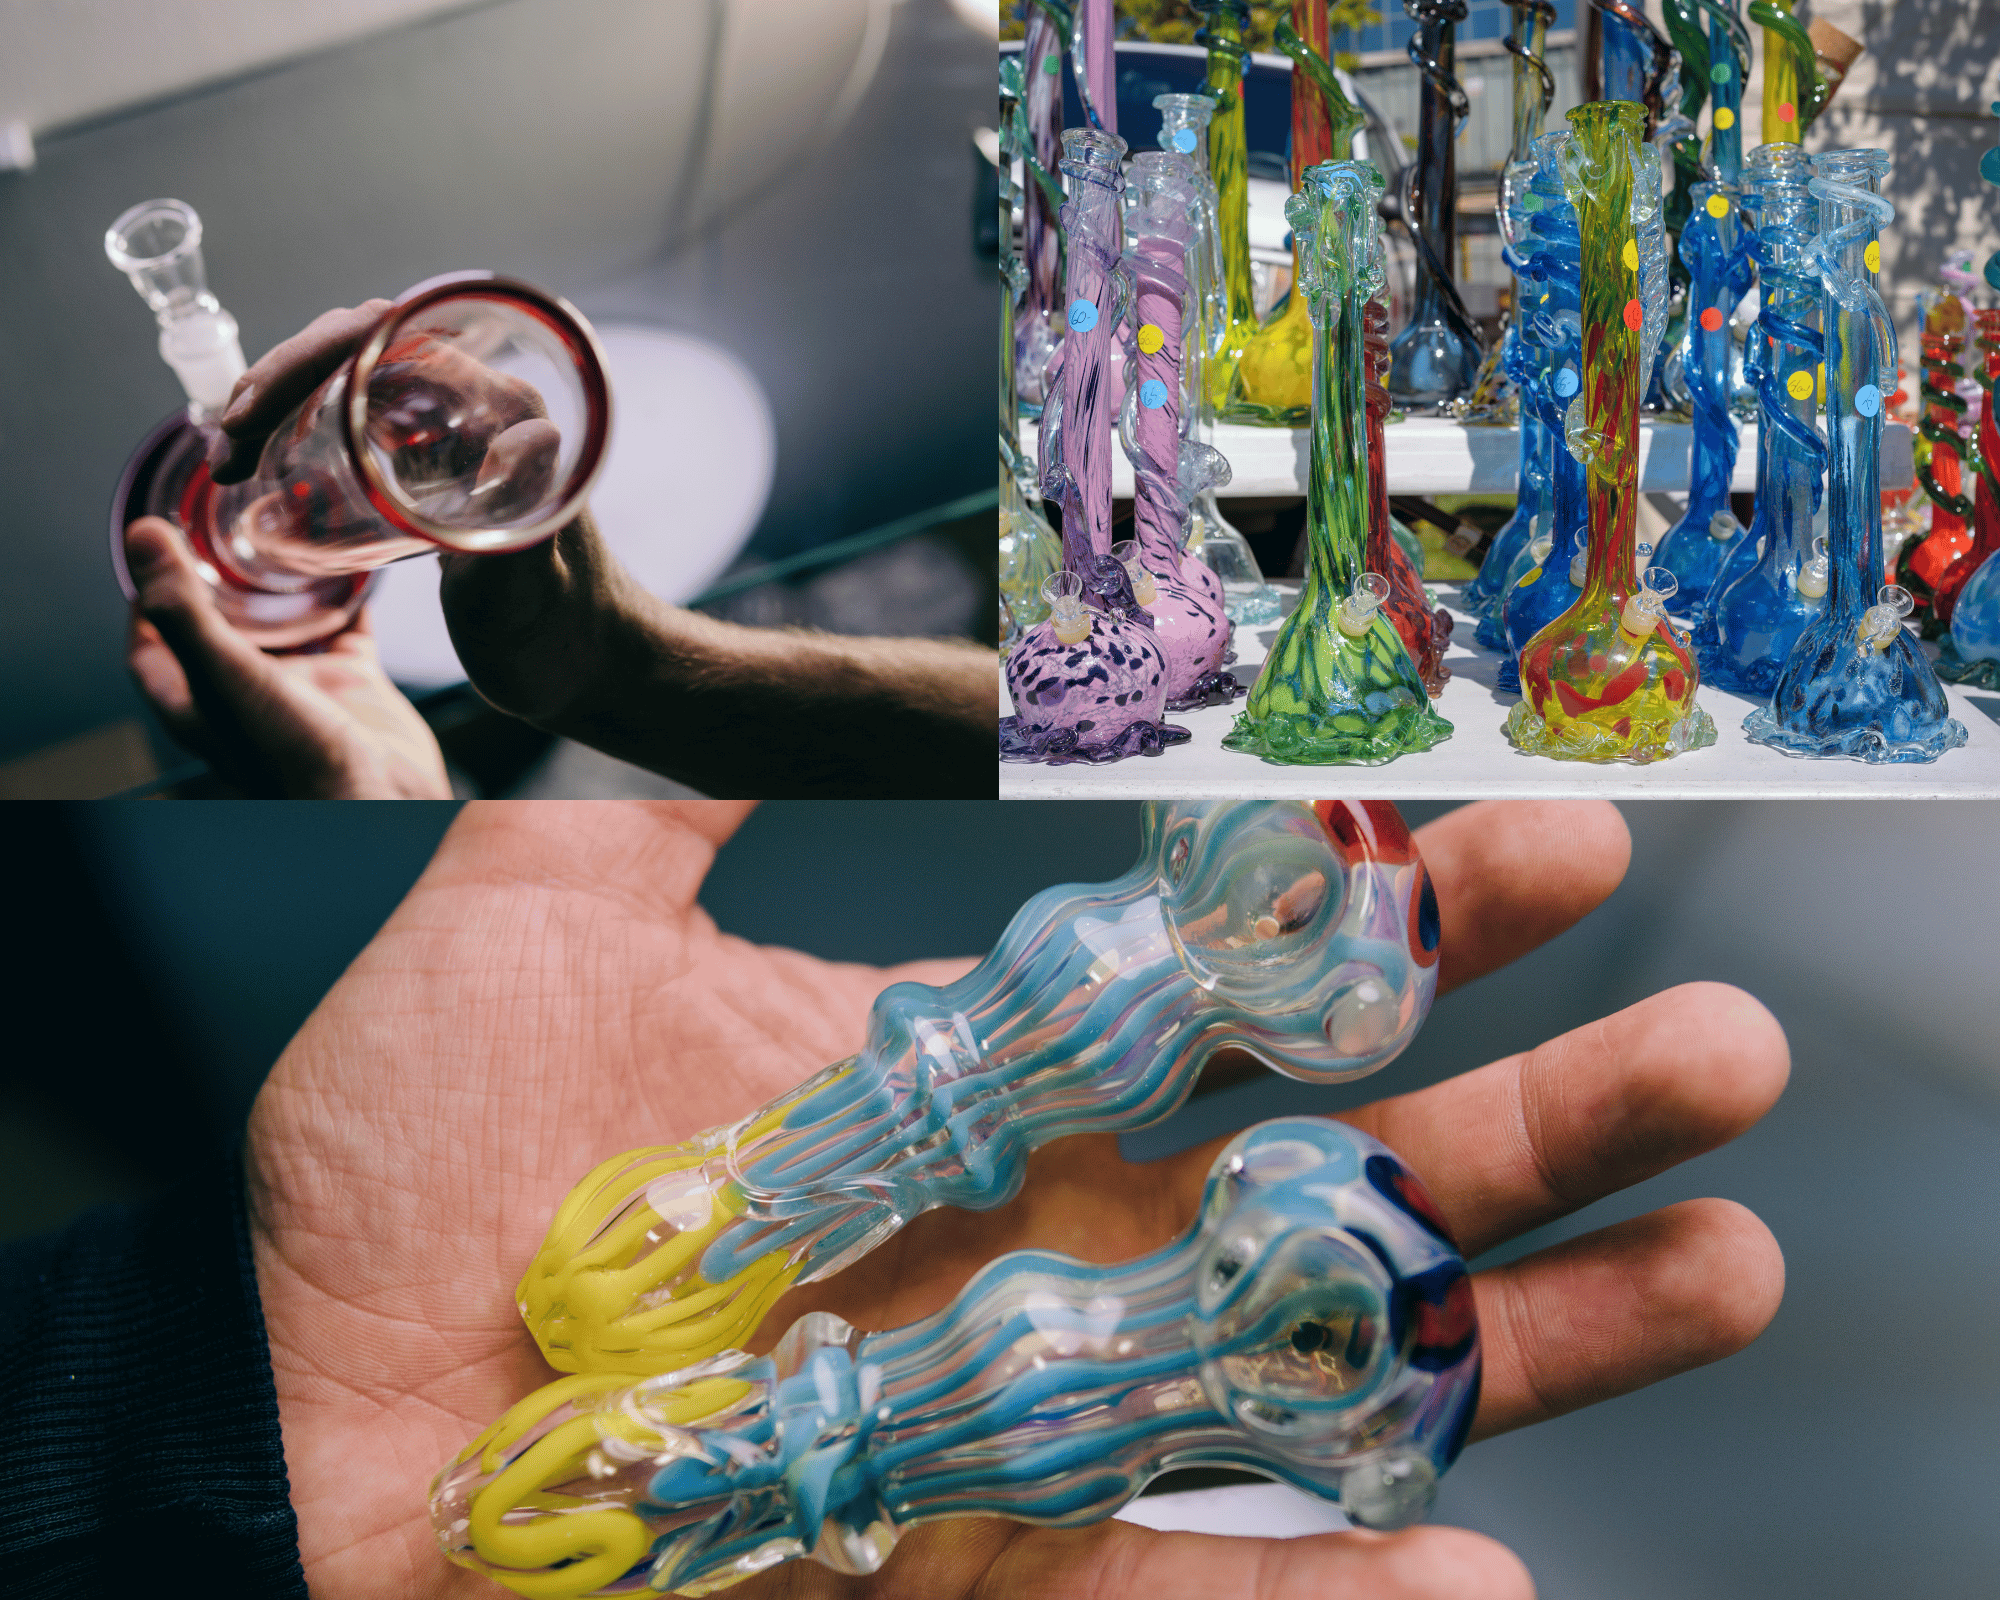 The Ultimate Guide: How to Clean a Bong Efficiently